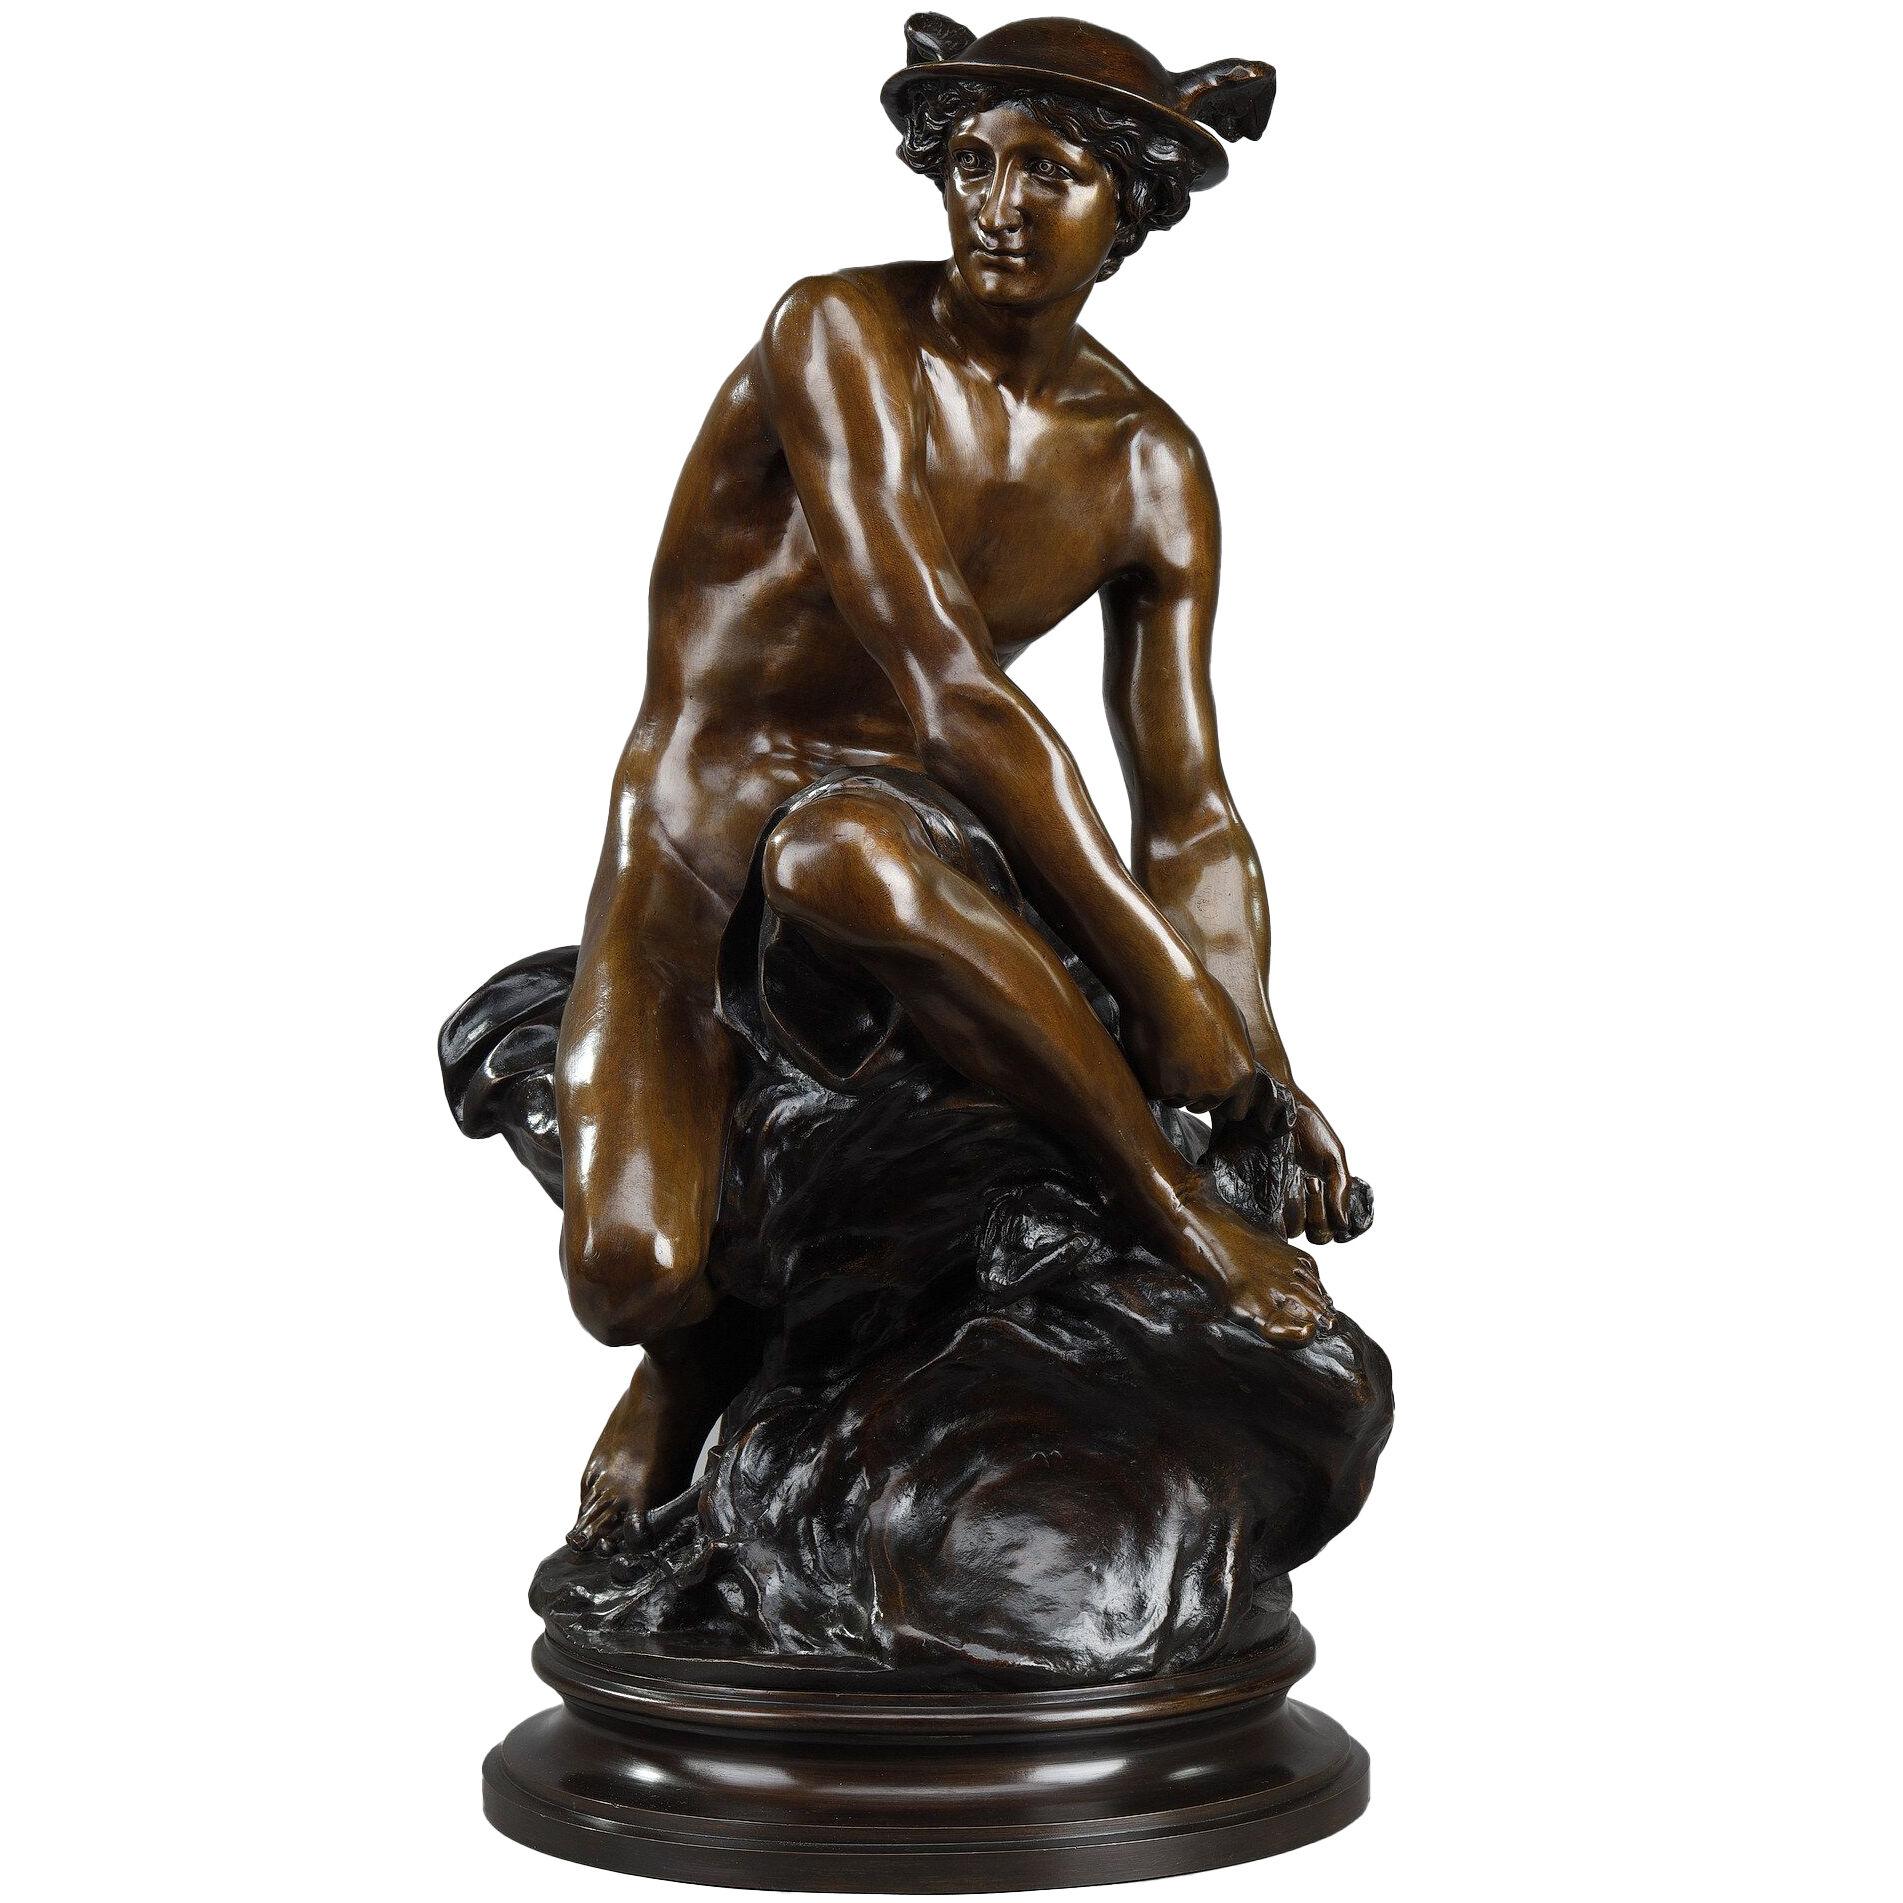 Bronze of "Mercury attaching his heel staps" after Pigalle